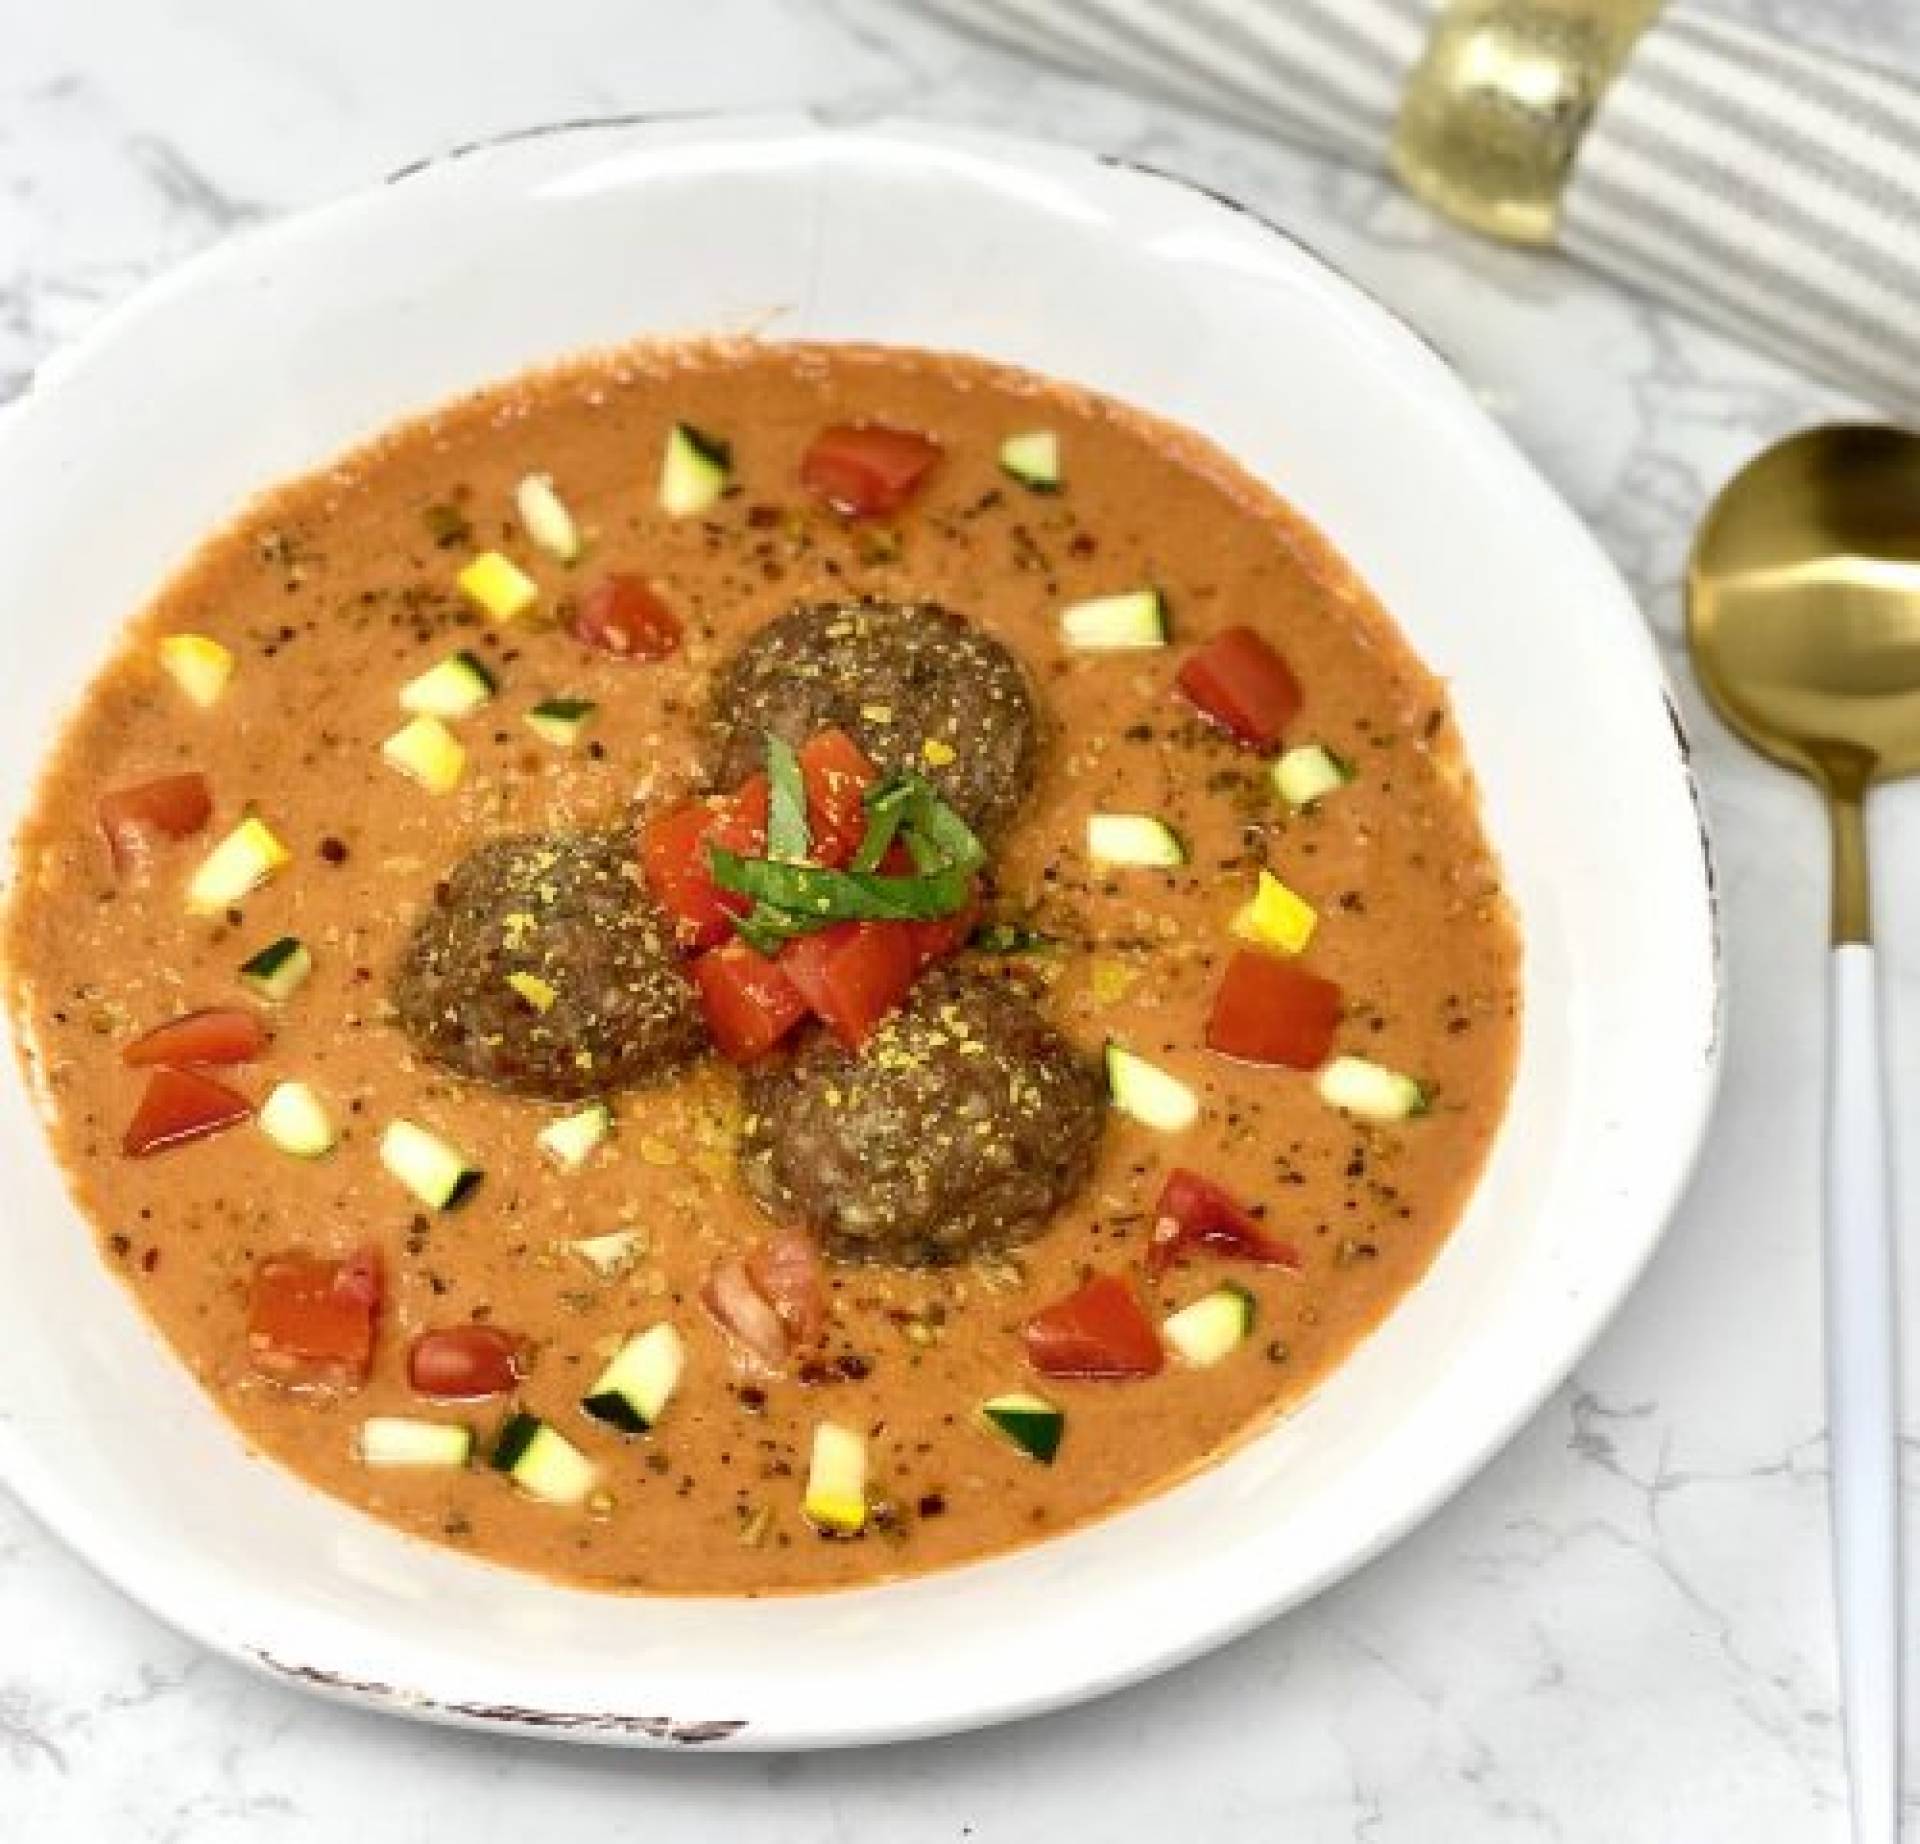 Tomato Basil Bisque with Turkey Meatballs